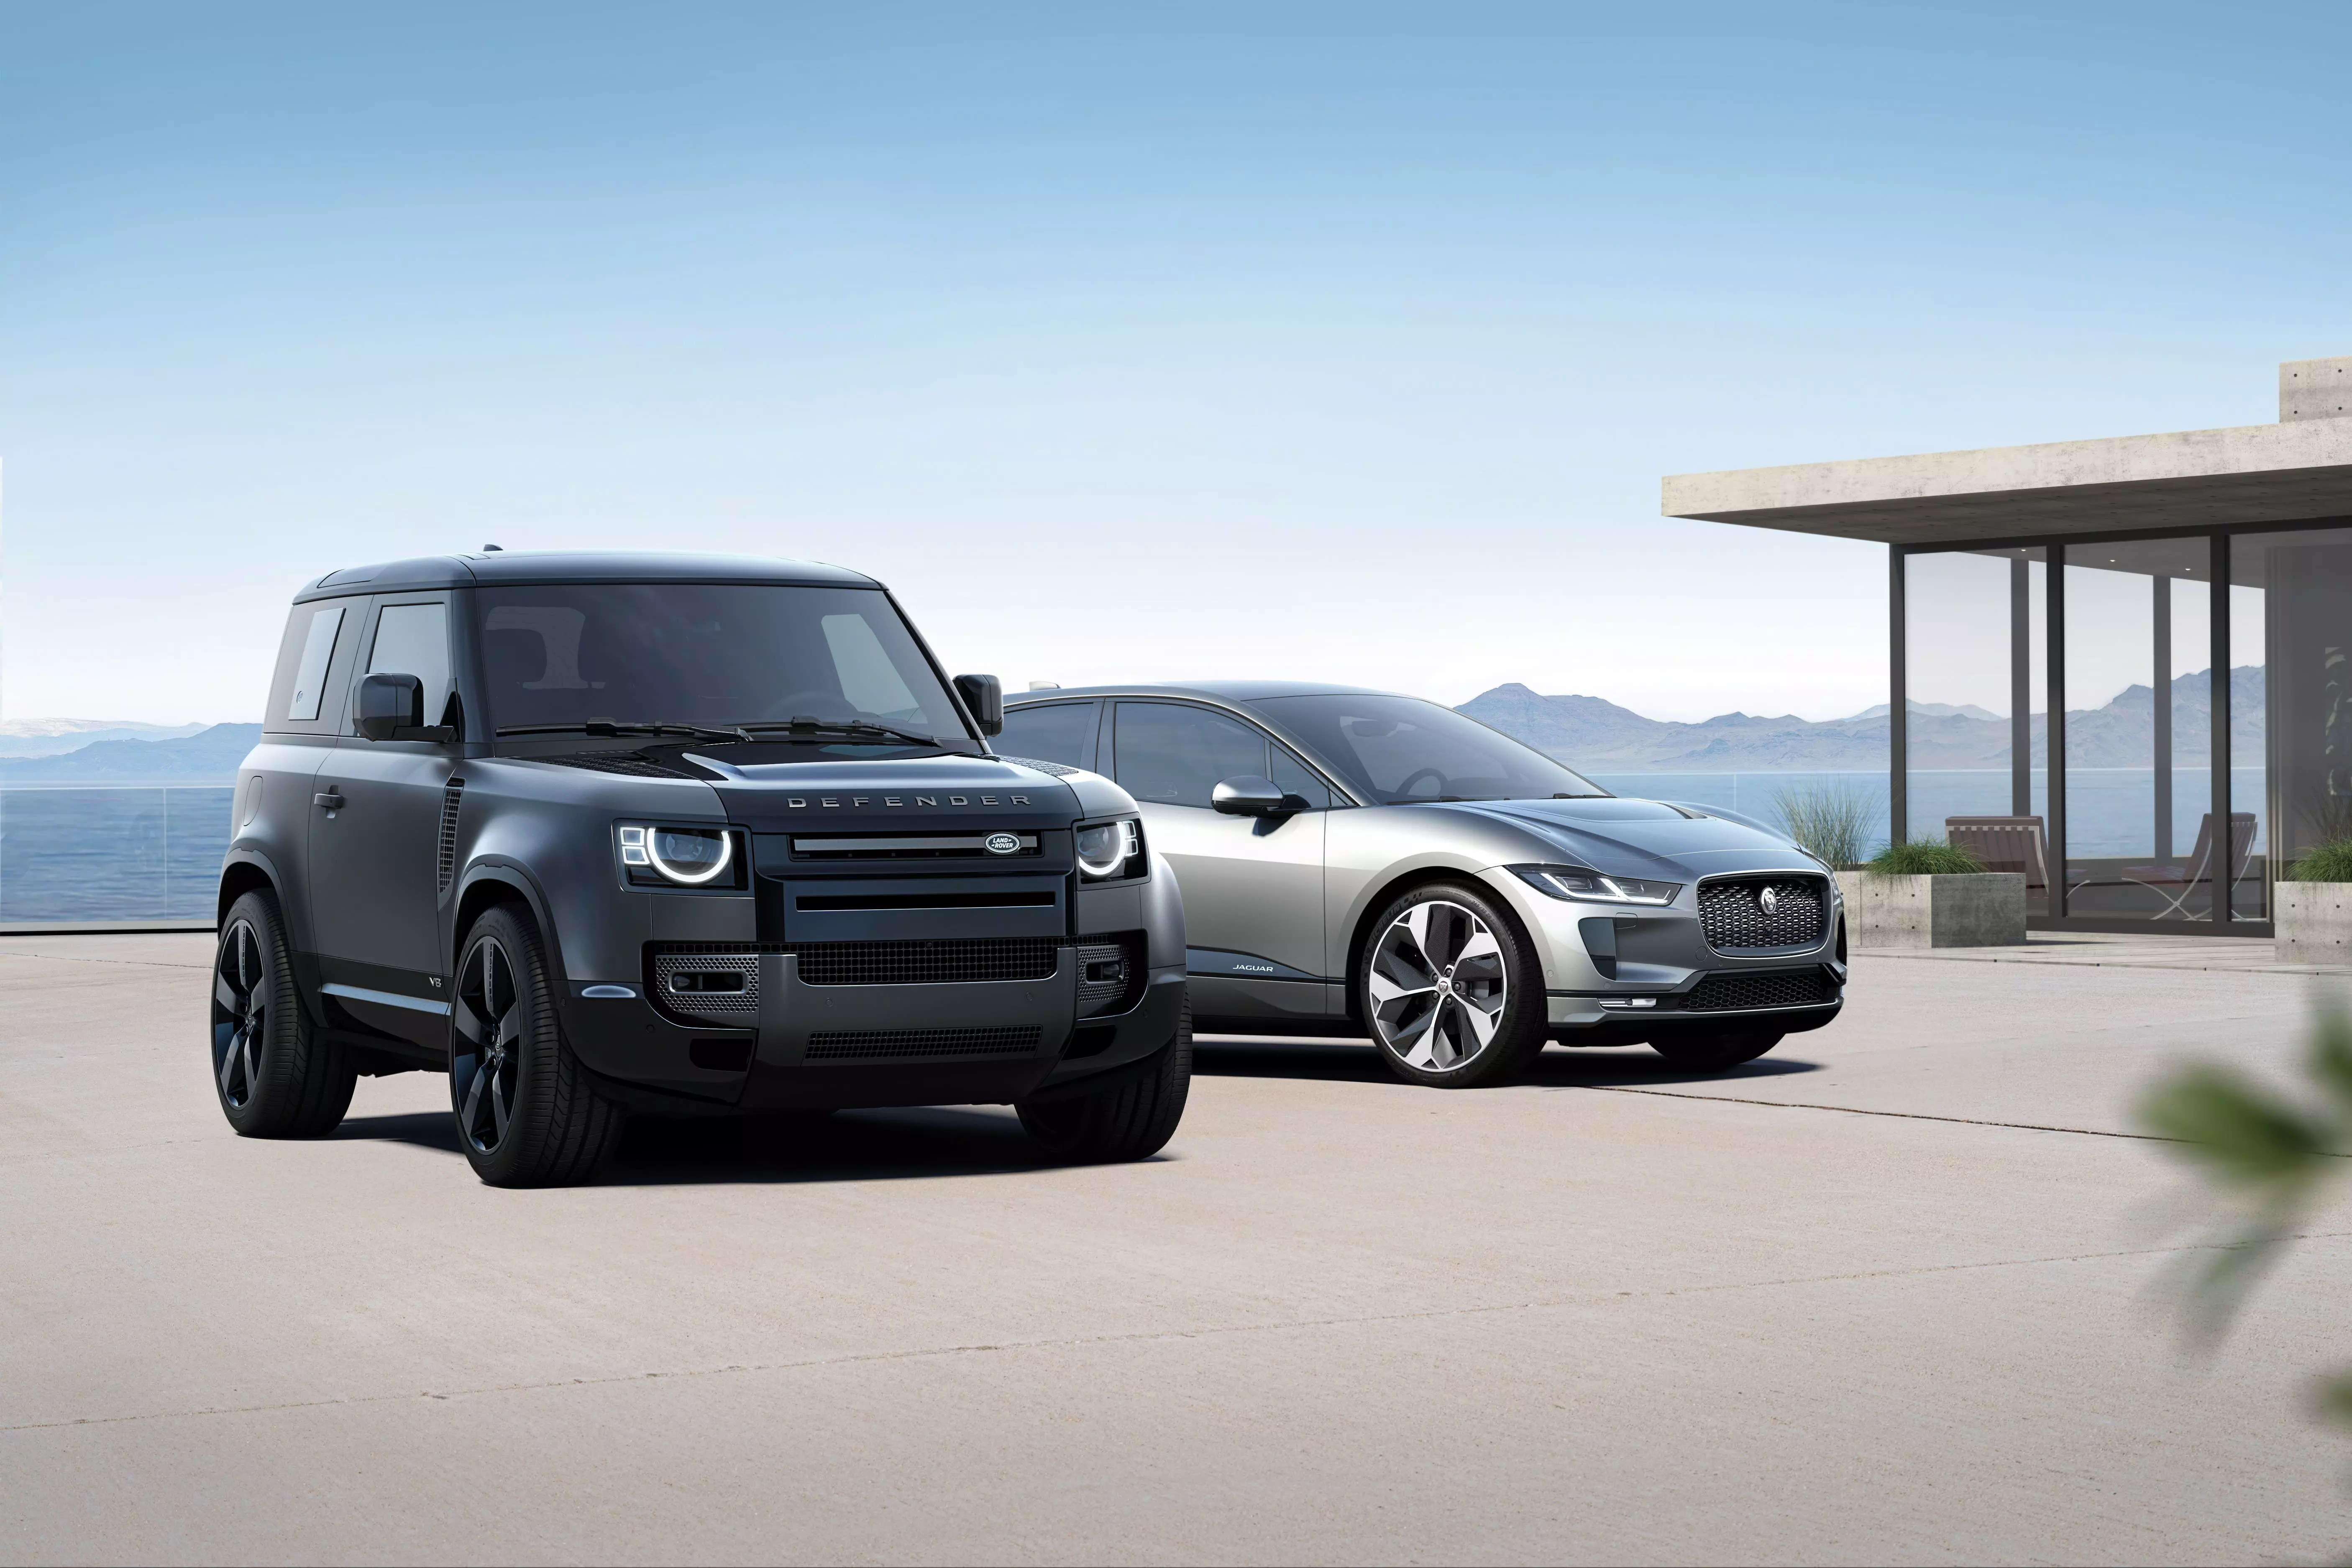 <p>Compared to the prior year, the brand’s wholesale volumes increased in the quarter for Range Rover (up 22% to 58,280 units), Defender (up 5% to 28,702 units), Jaguar (up 39% to 13,528 units) and Discovery (up 1% to 9,680 units), the company said in a media release.</p>